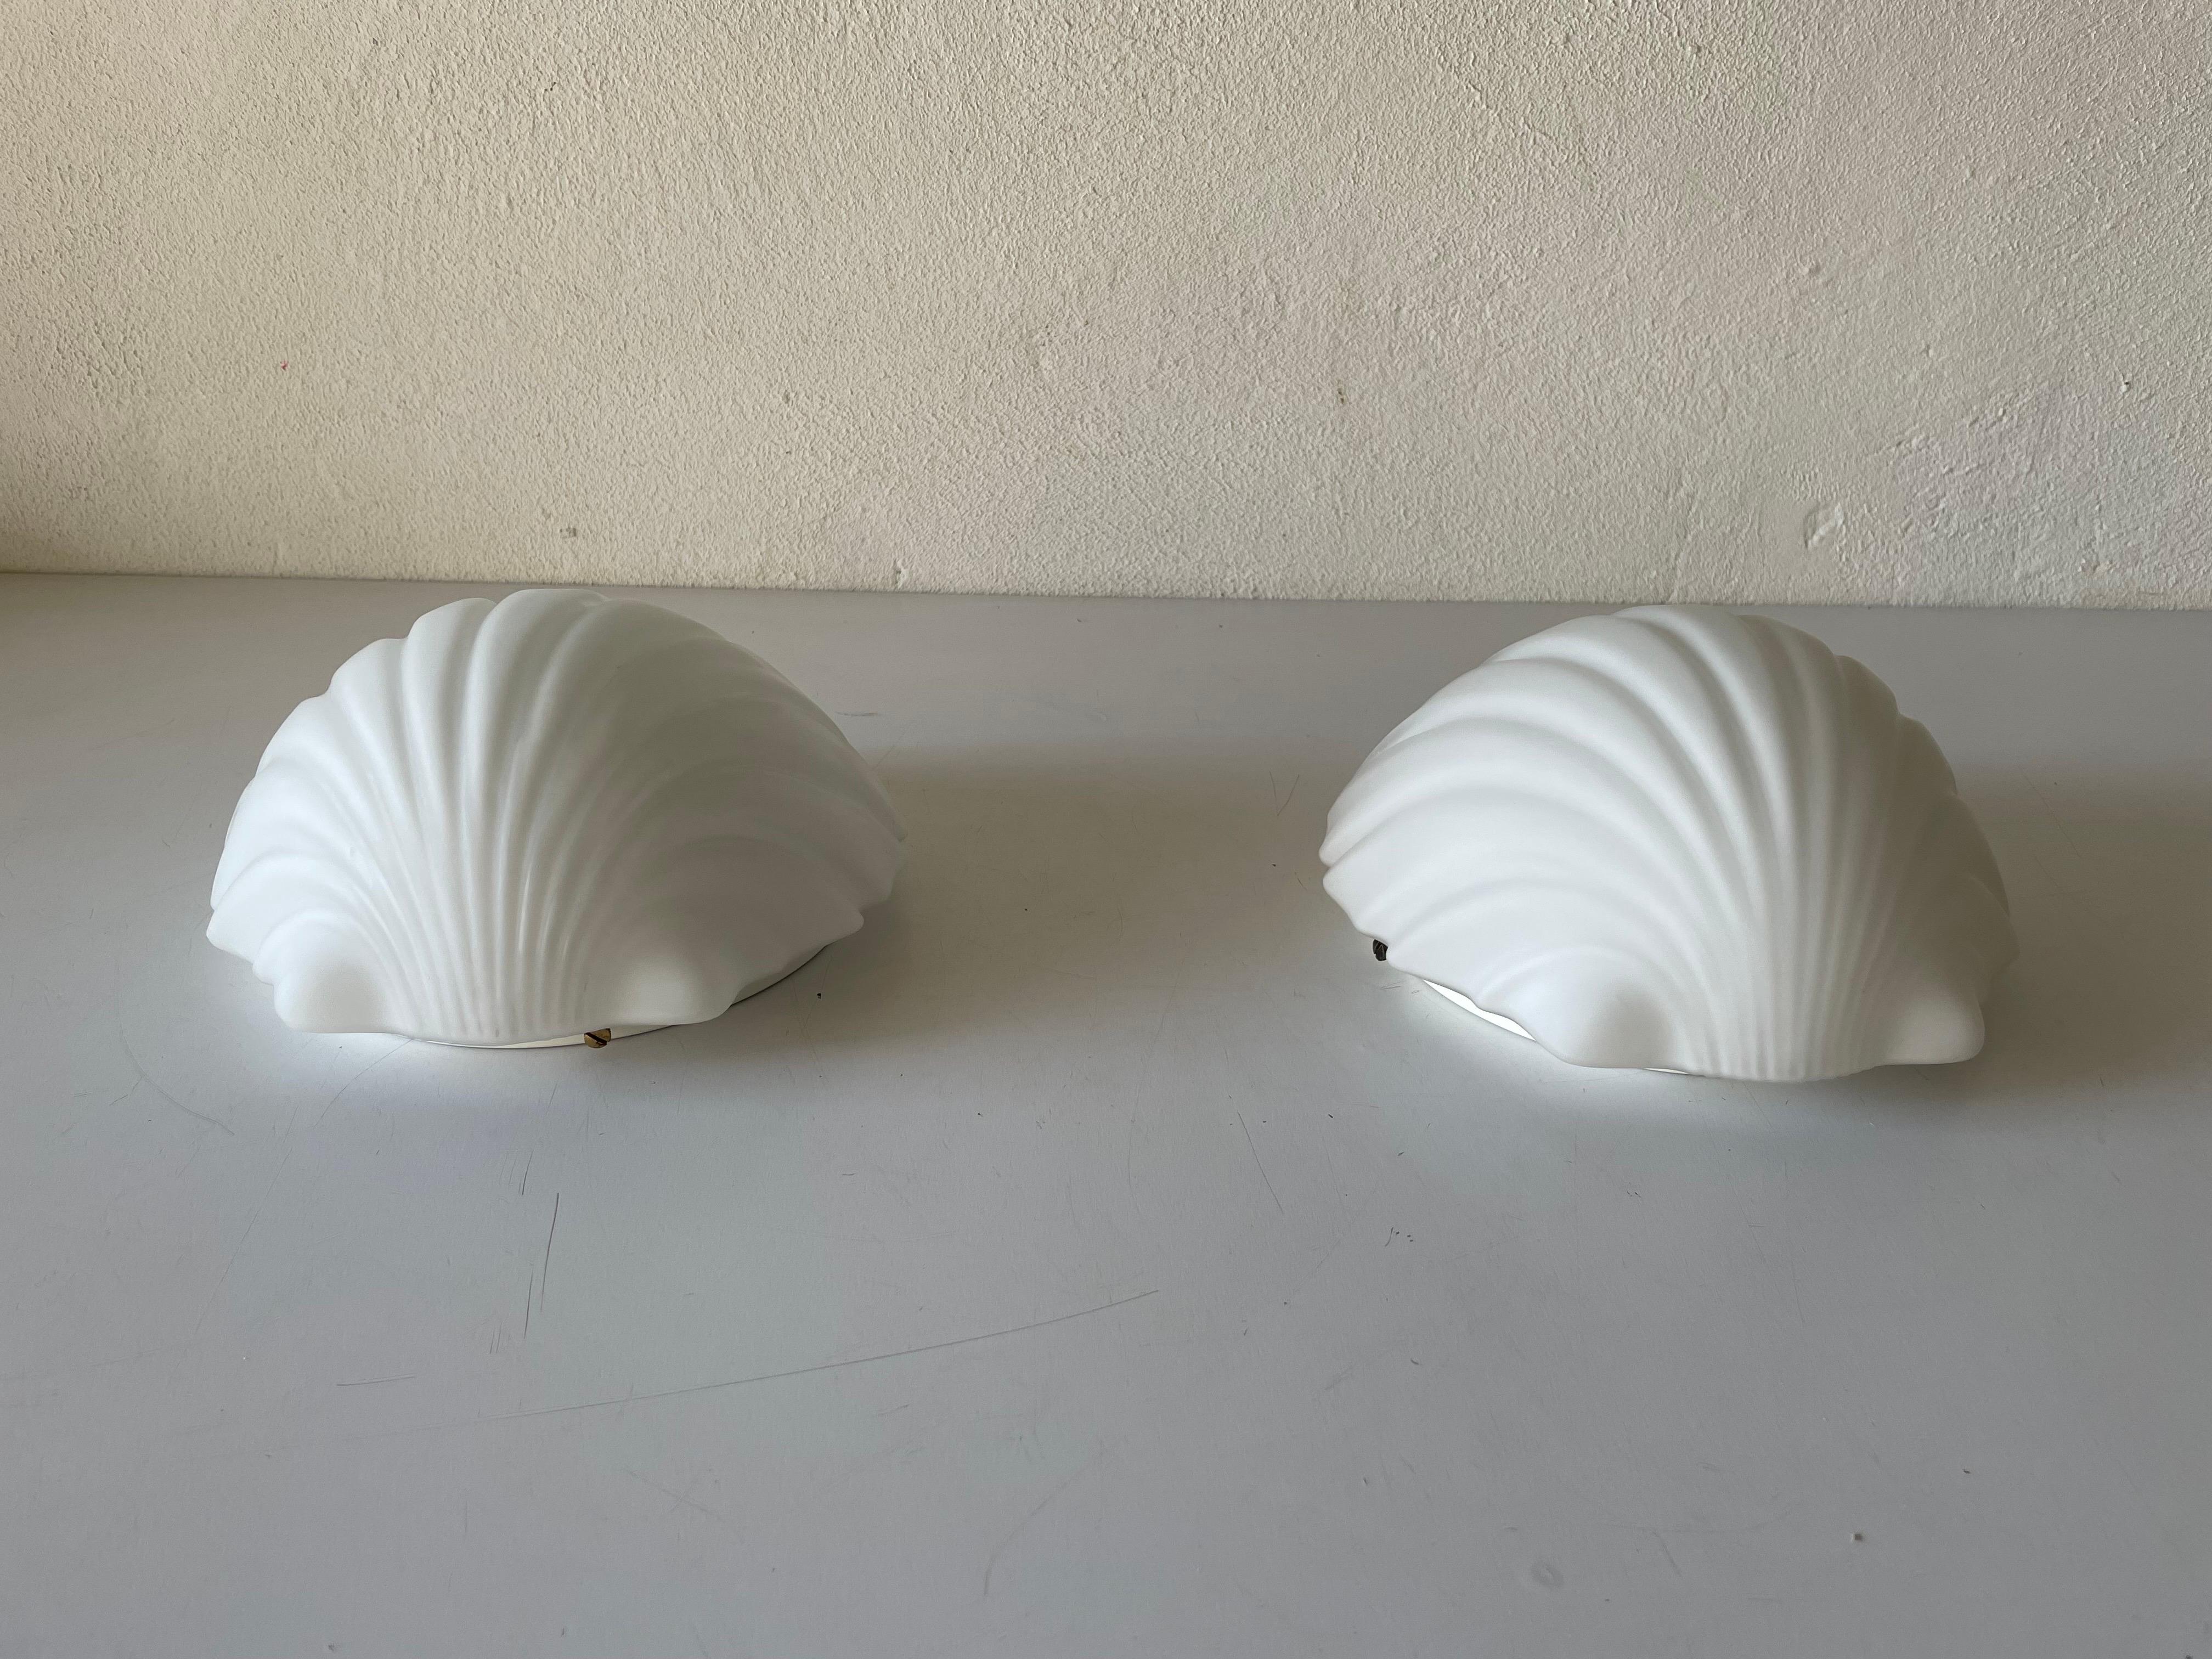 Shell shaped opal glass pair of wall lamps by Limburg, 1960s, Germany

Very elegant and Minimalist wall lamps

Lamps are in very good condition.

These lamps works with E27 standard light bulbs. 
Wired and suitable to use in all countries.